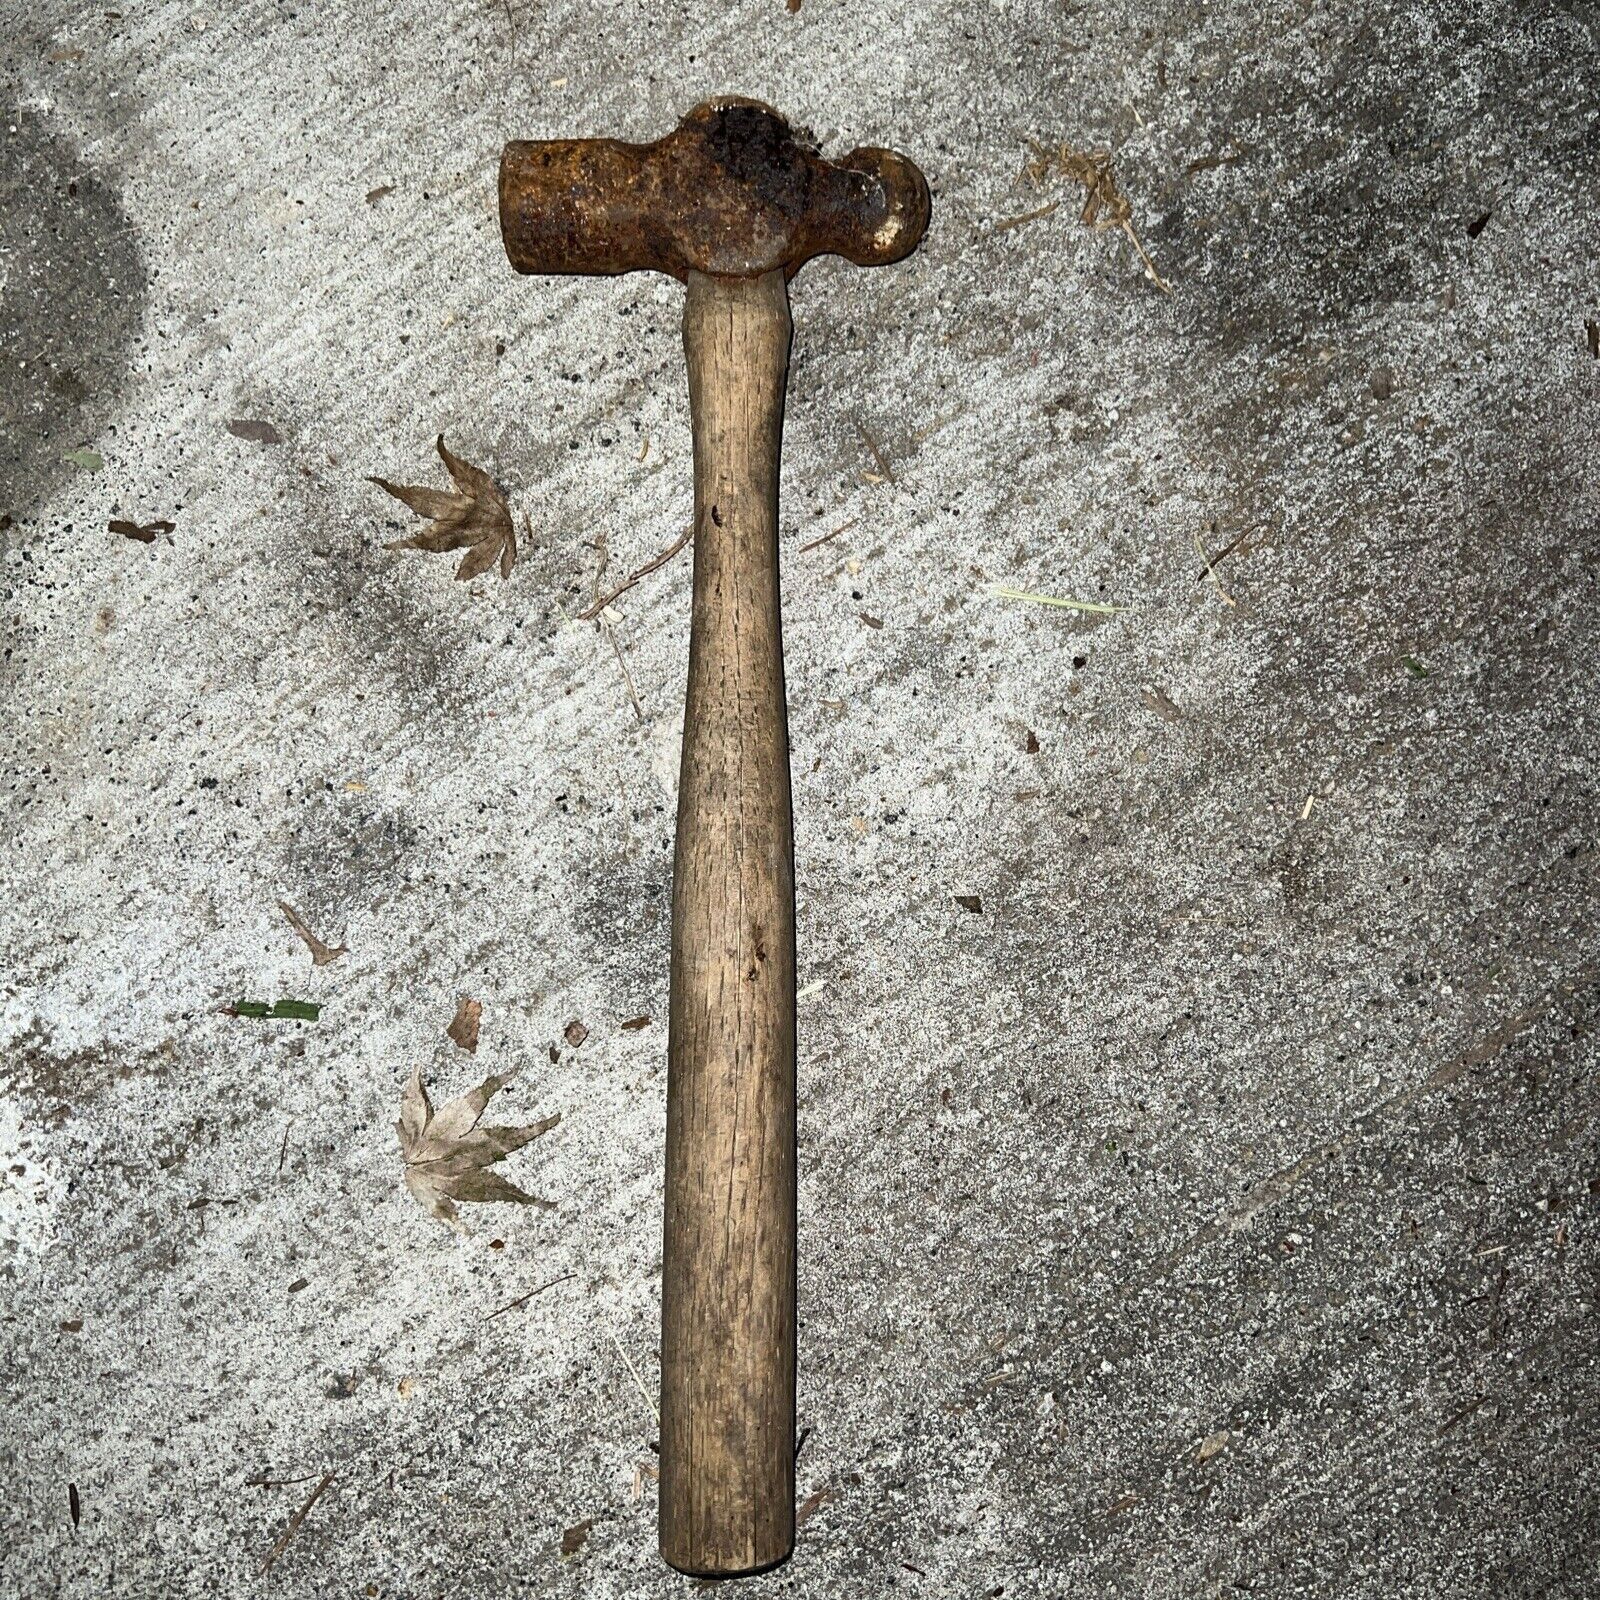 Vintage 8oz Ball Peen Hammer - Made in USA